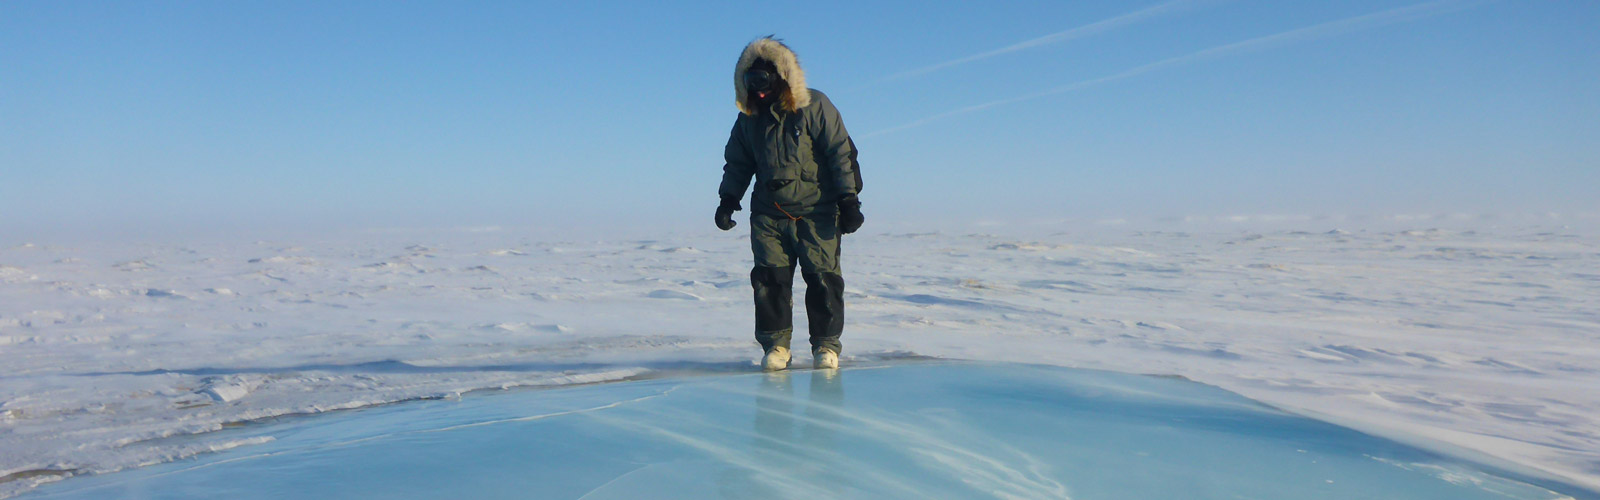 Researcher standing on frozen lake ice.